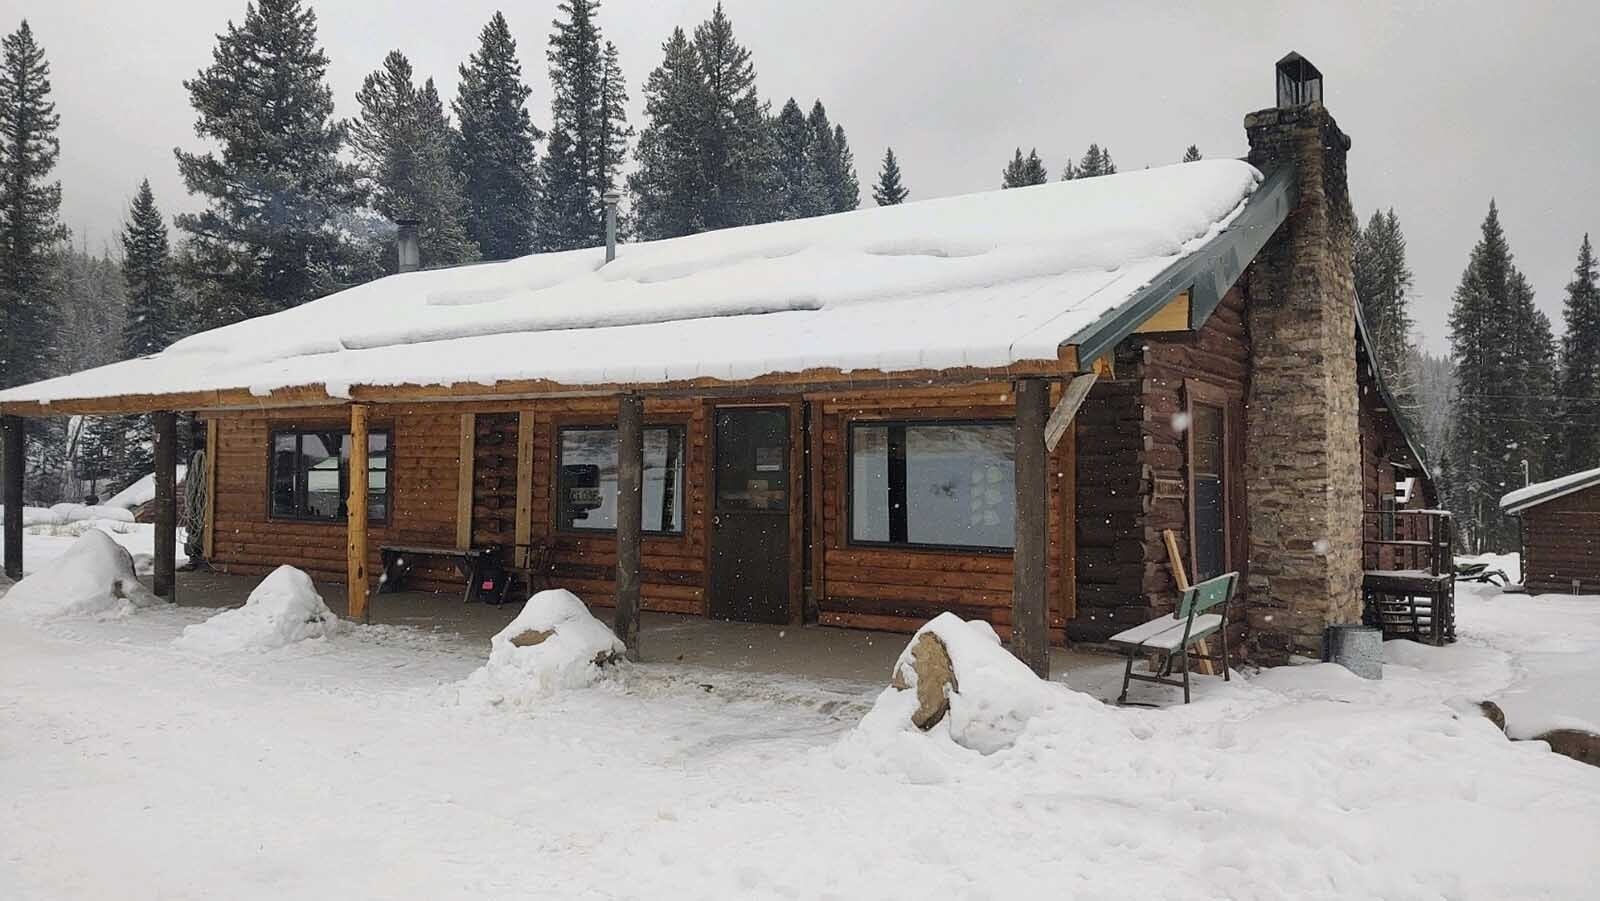 The weather's perfect for snowmobiling or just staying warm inside with friends at the iconic Deer Haven Lodge, which reopened Thursday under new ownership.